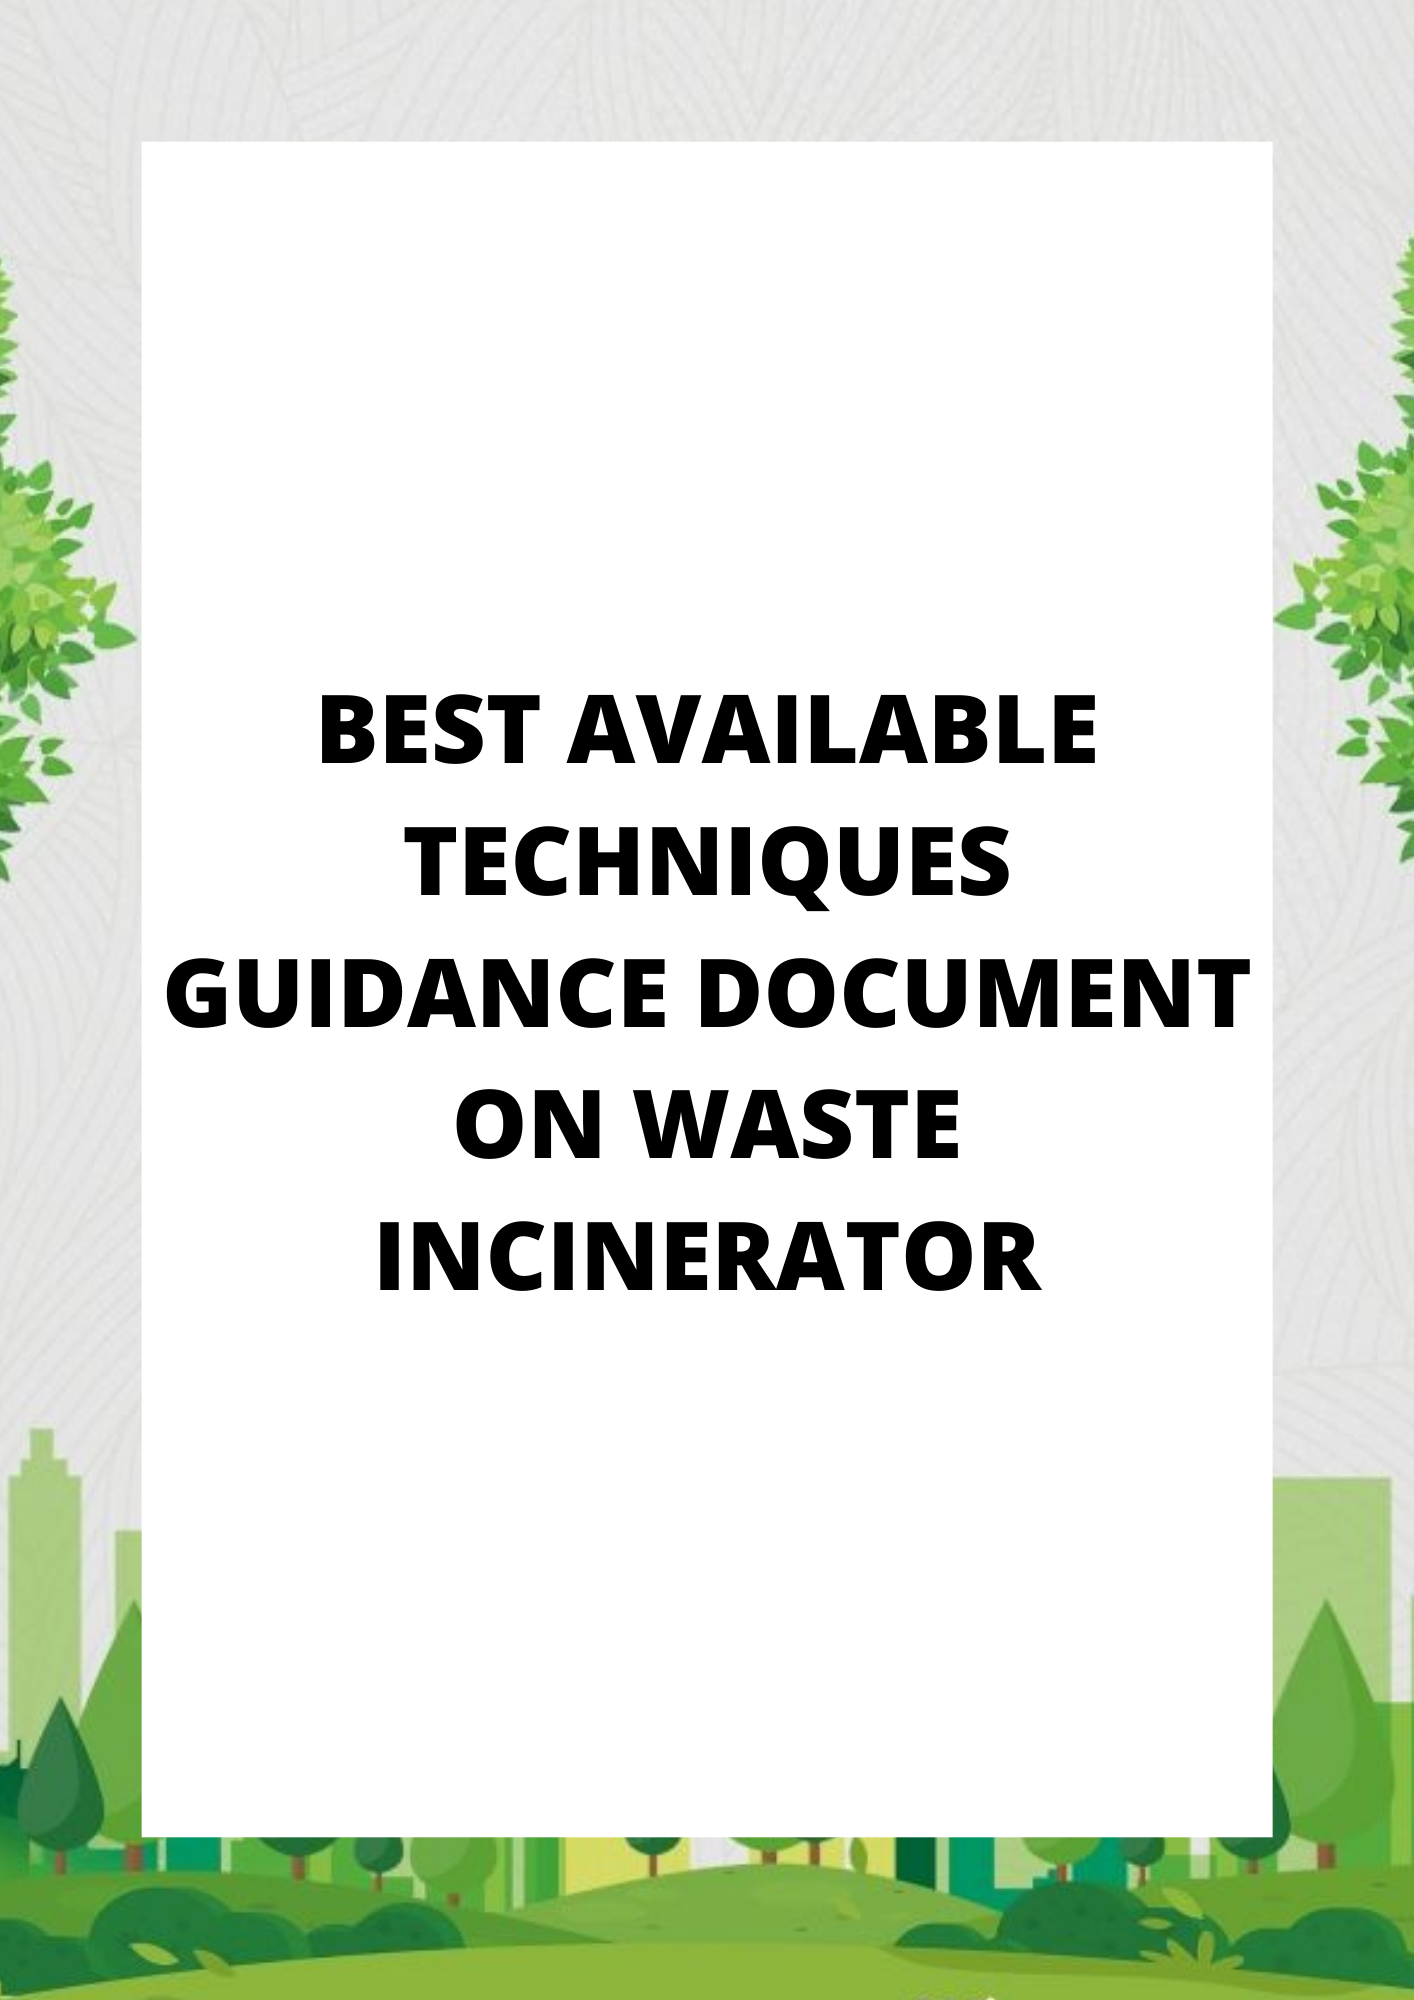 BEST AVAILABLE TECHNIQUES GUIDANCE DOCUMENT ON WASTE INCINERATOR